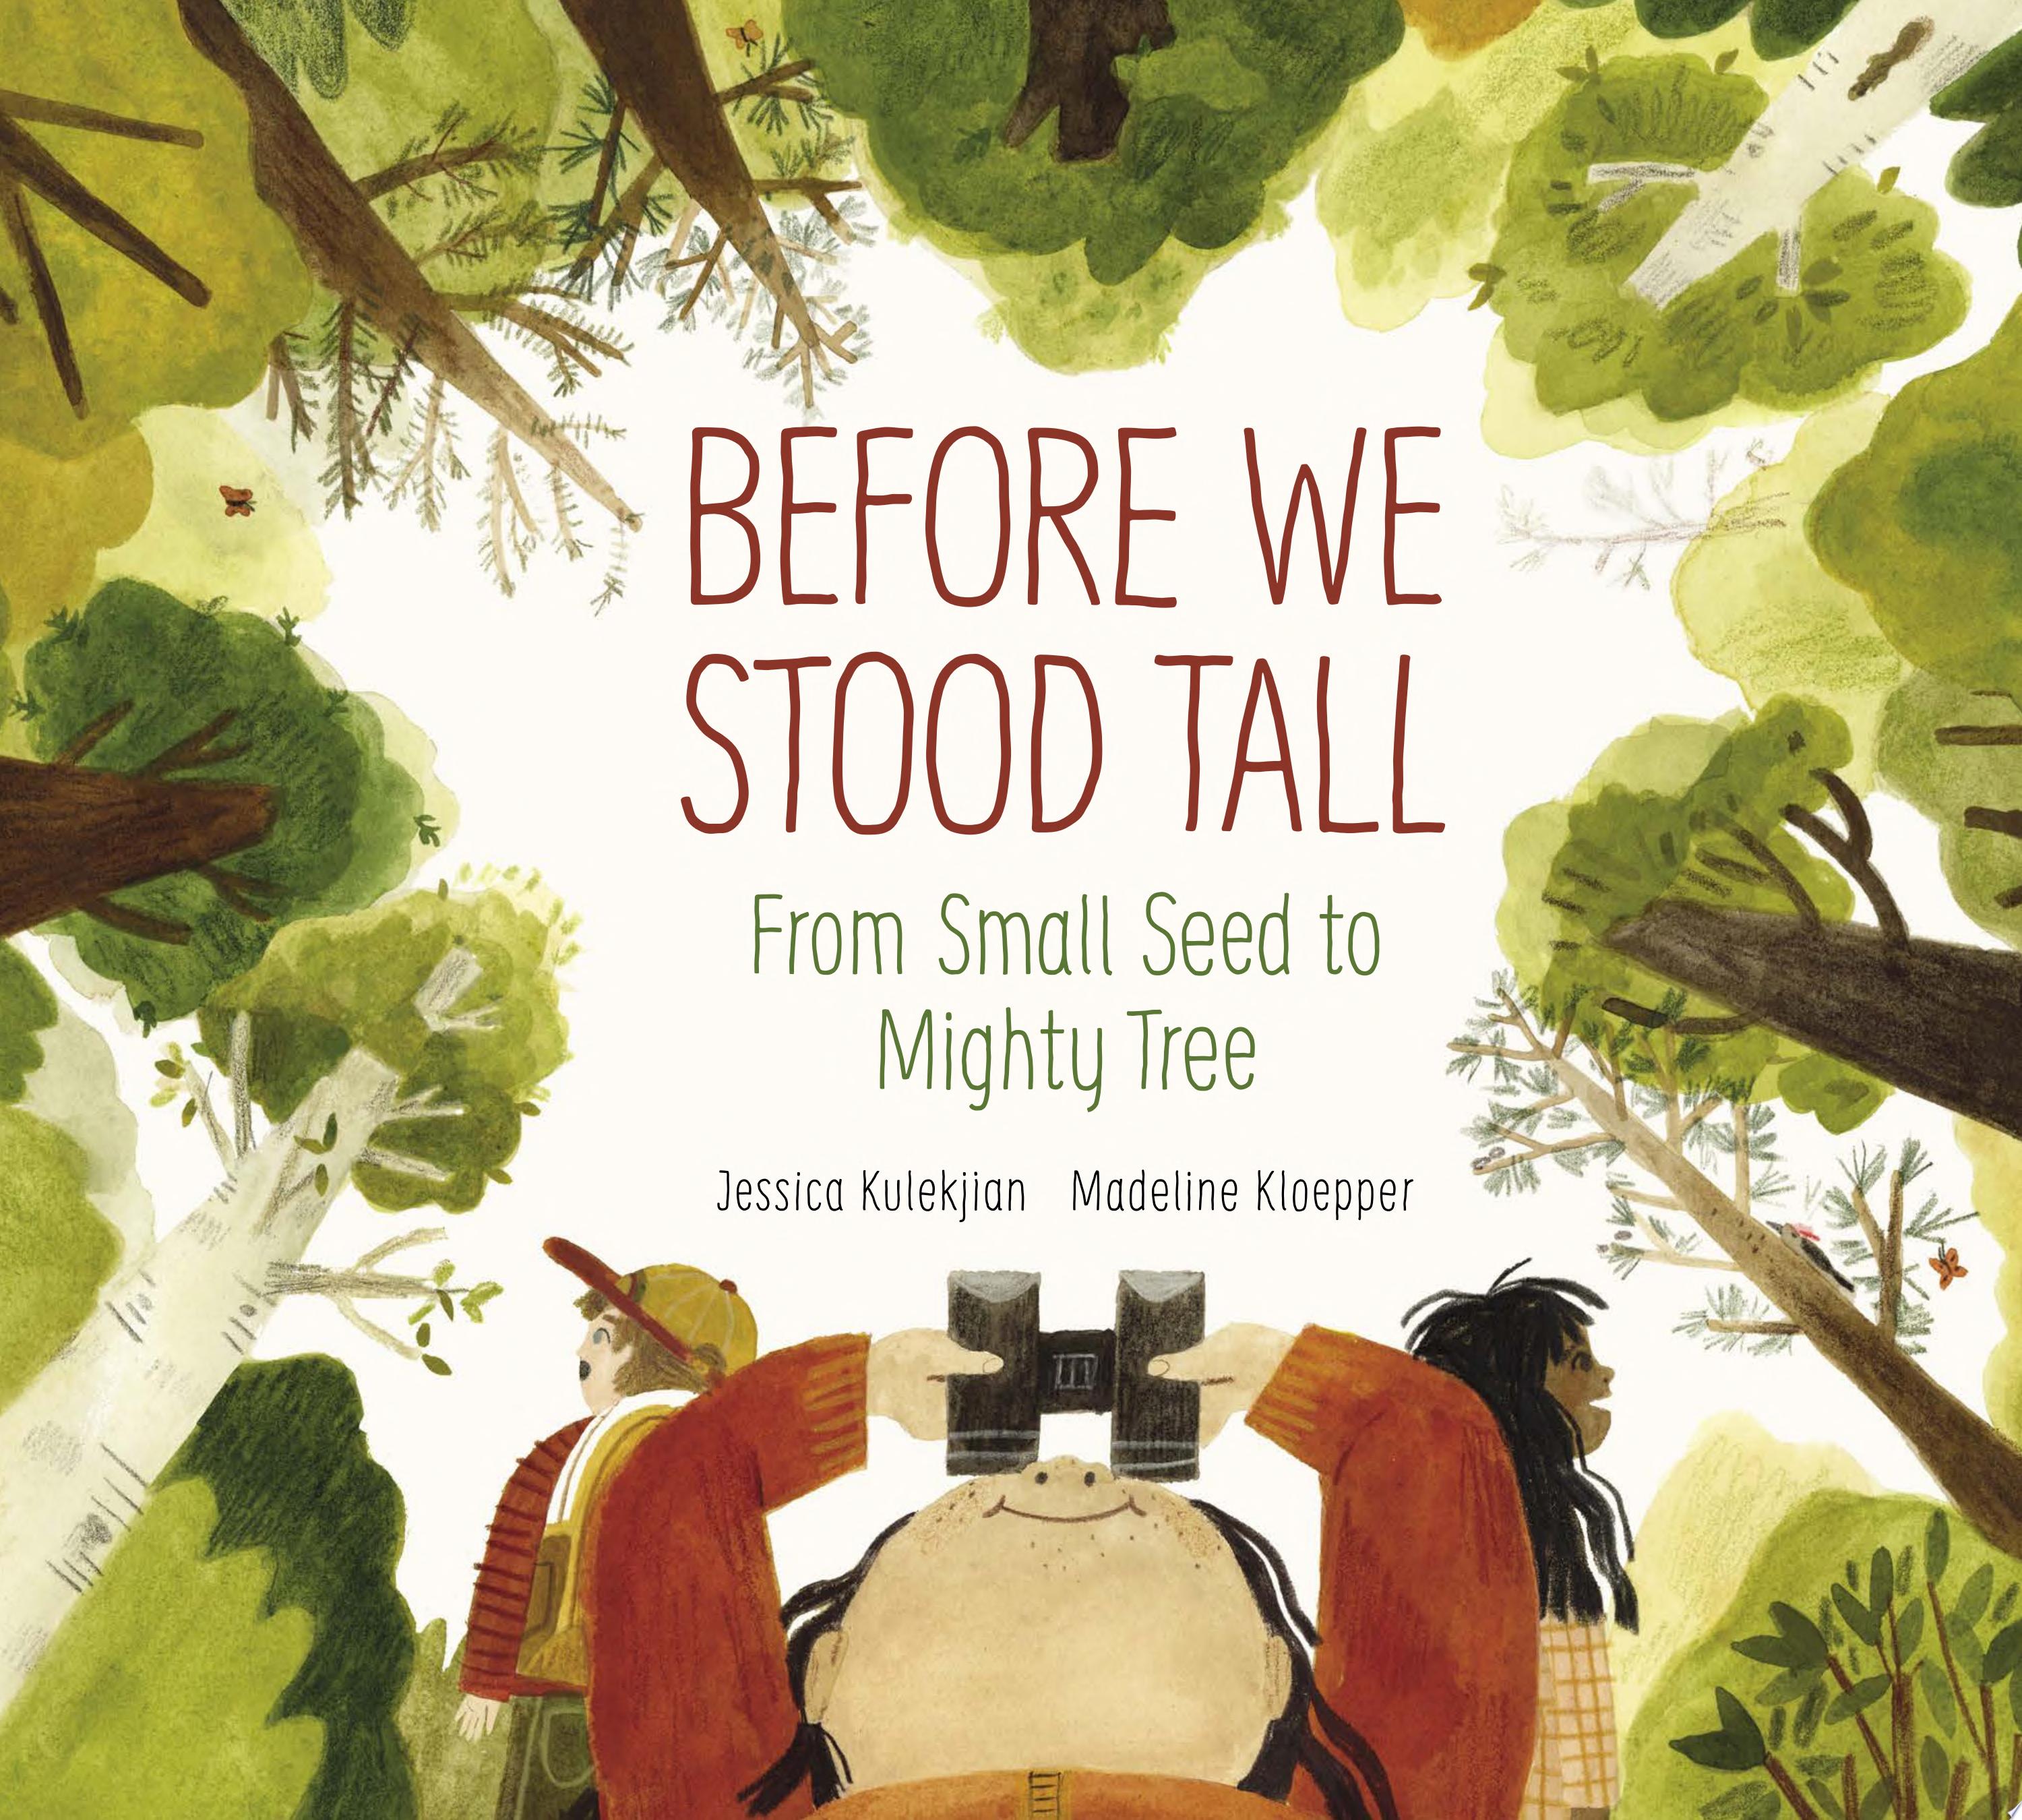 Image for "Before We Stood Tall"